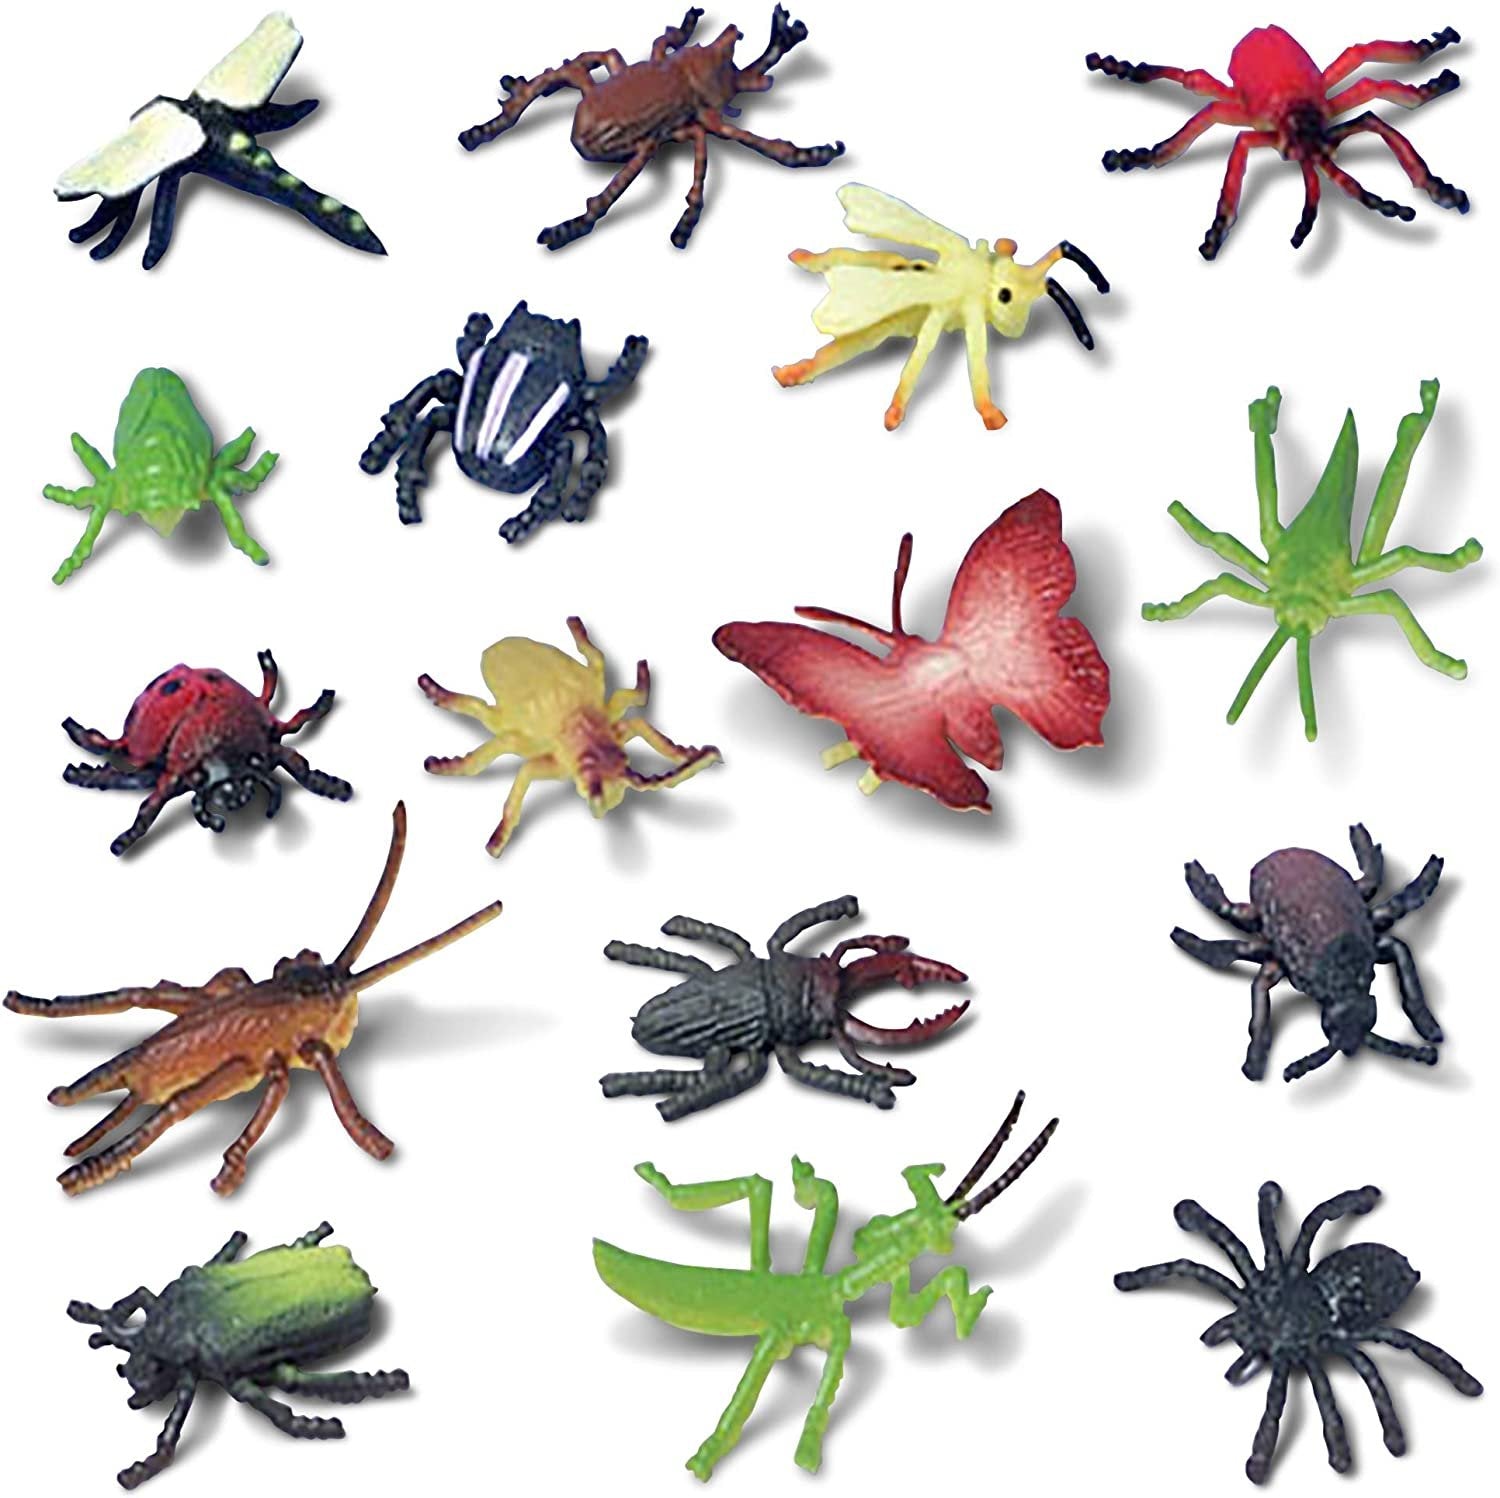 Insect Figurines Toys Set - 72 Pack - Assorted Plastic Bug Animal Figures for Kids - Fun Learning Aid, Birthday Party Favors, Cake Toppers, Prank Gag Toys, Goody Bag Fillers, Gift Idea